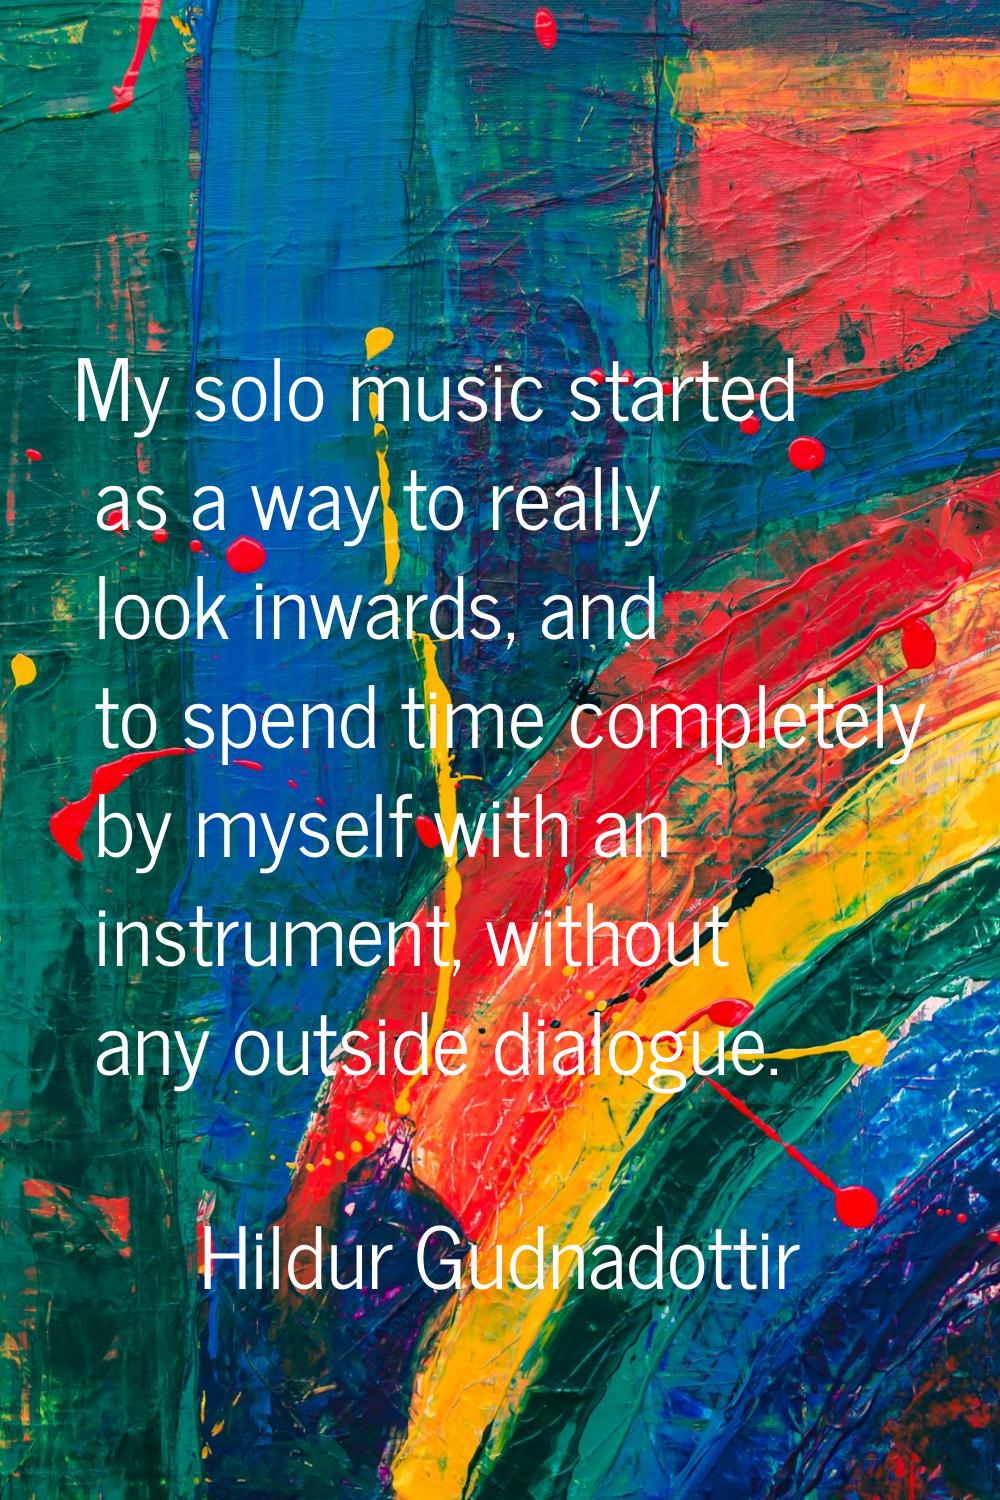 My solo music started as a way to really look inwards, and to spend time completely by myself with 